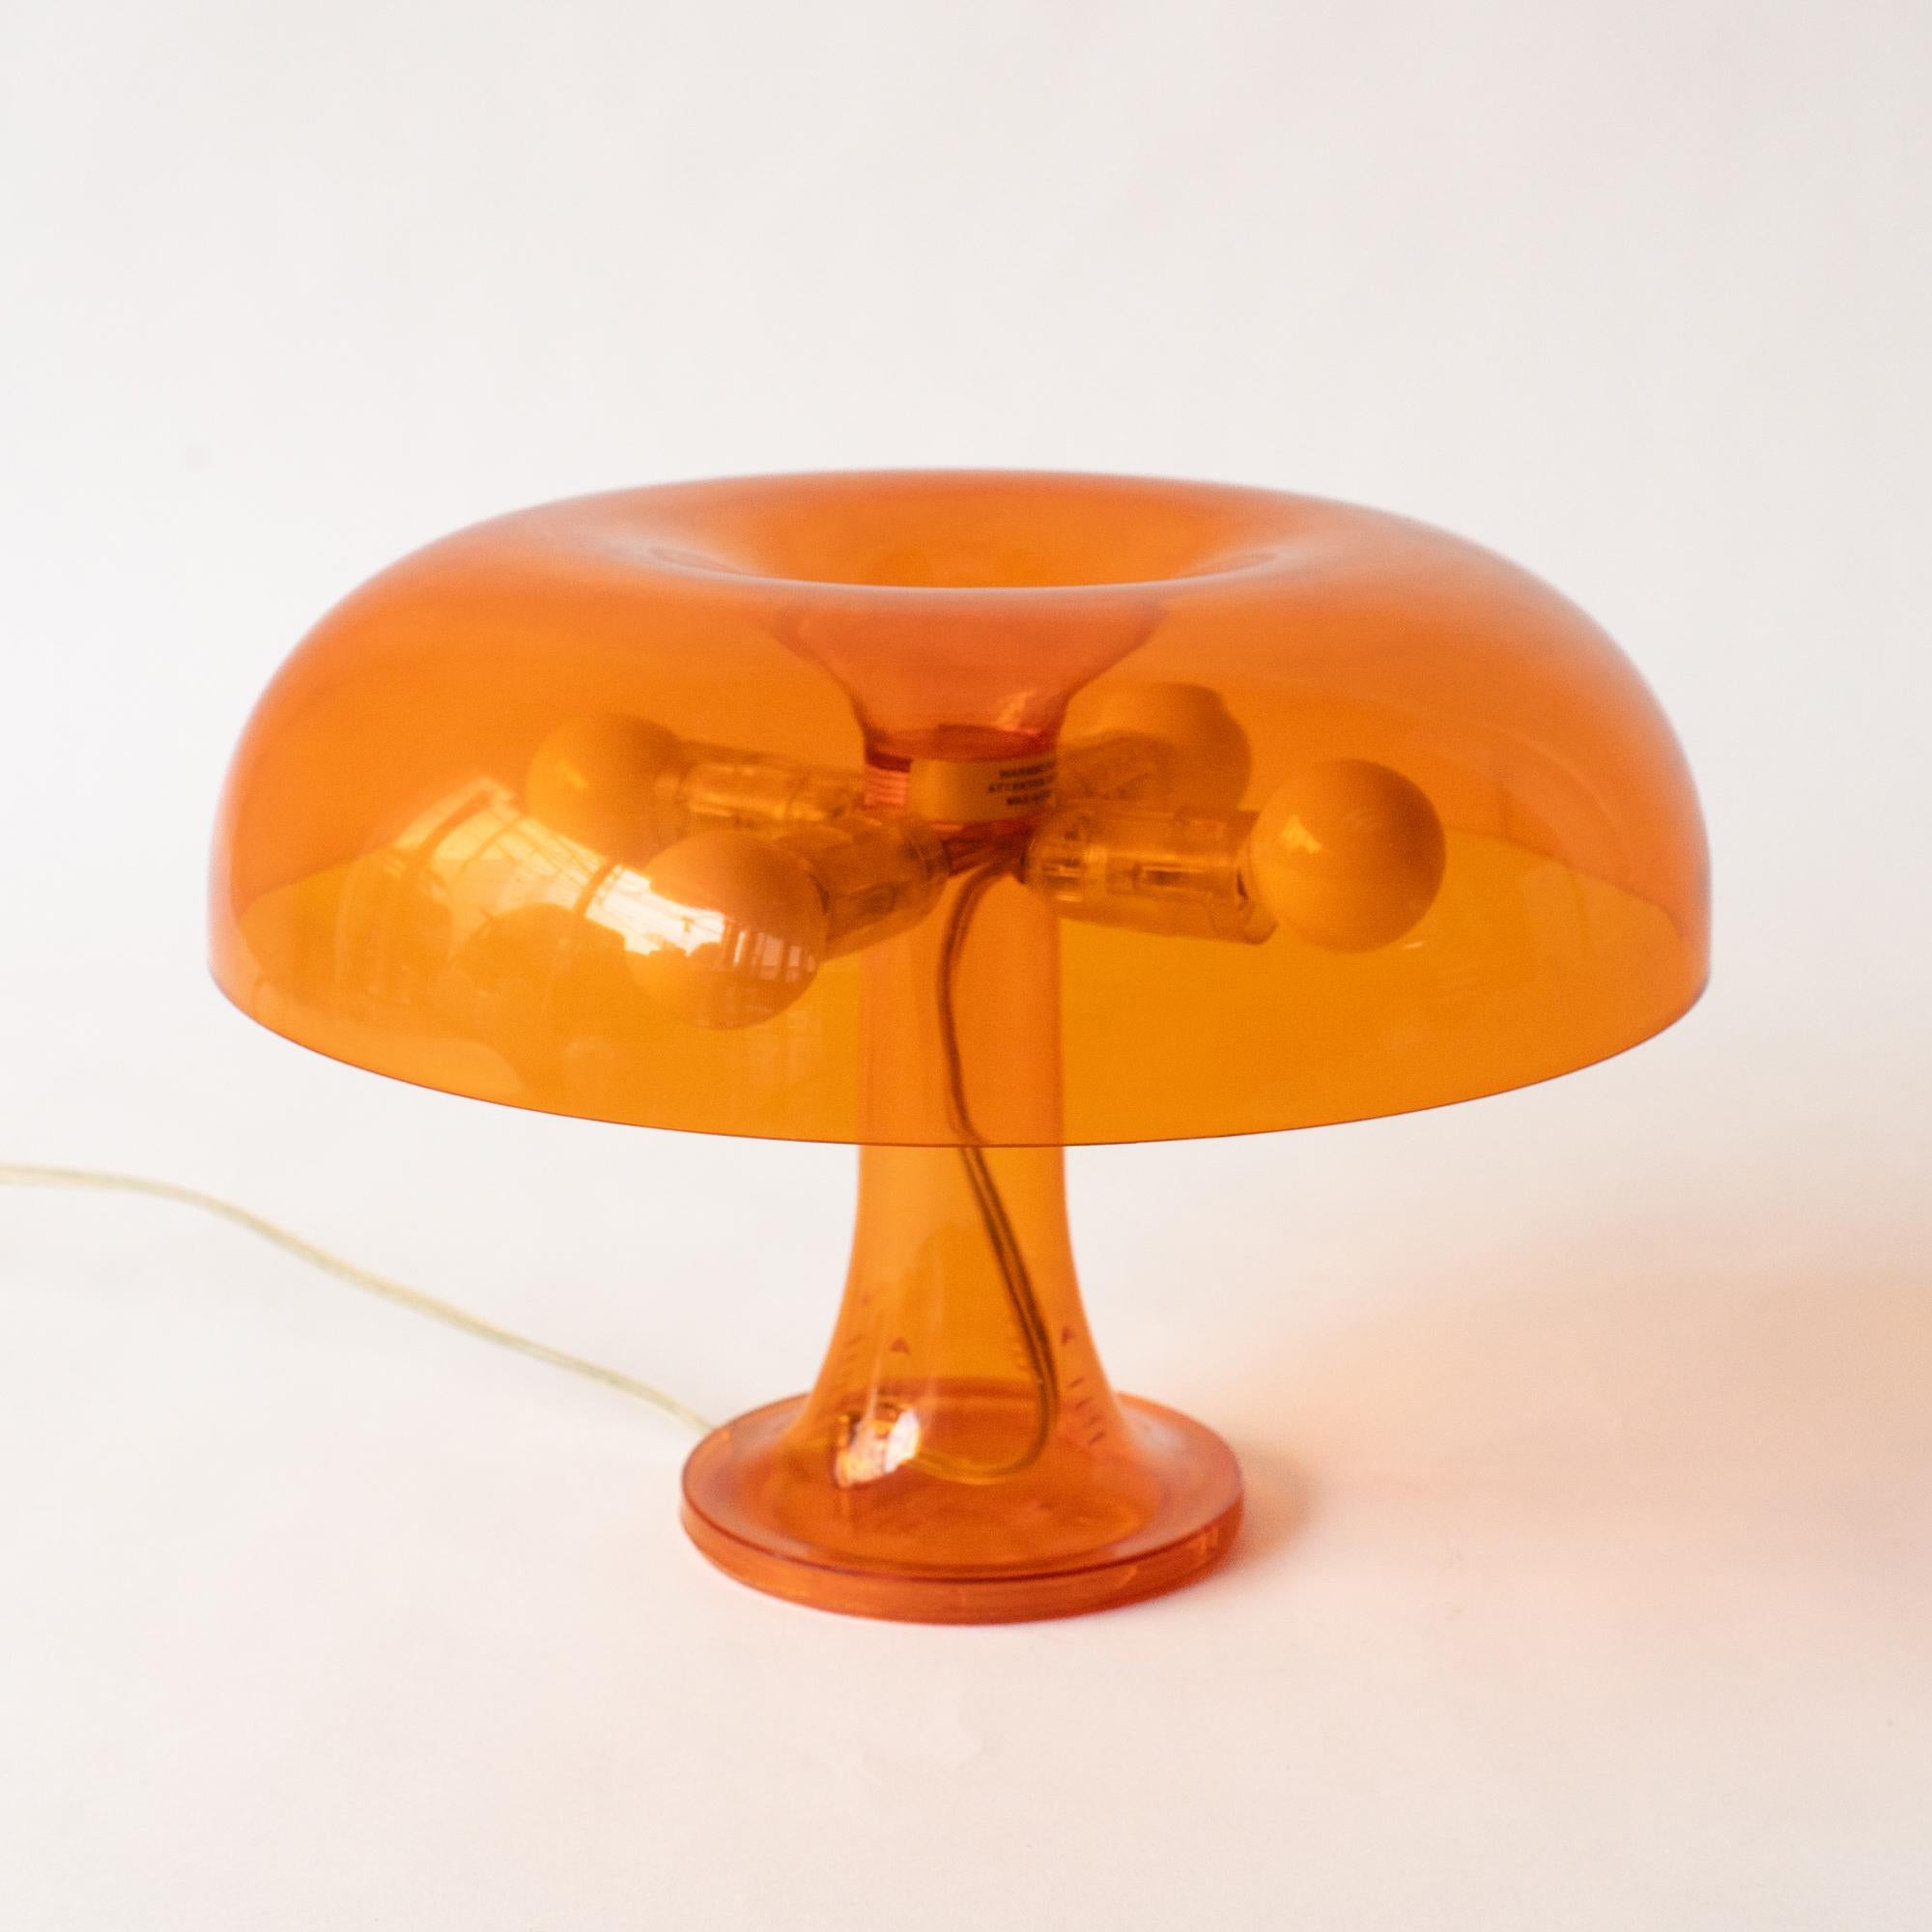 Masterpiece table lamp of Space Age design.Original was released from the 60s by Artemide.  It is transparent model released only from the late 90s until 2000s. It's improved design suitable for Y2K trend. This is highly valuable piece and iconic